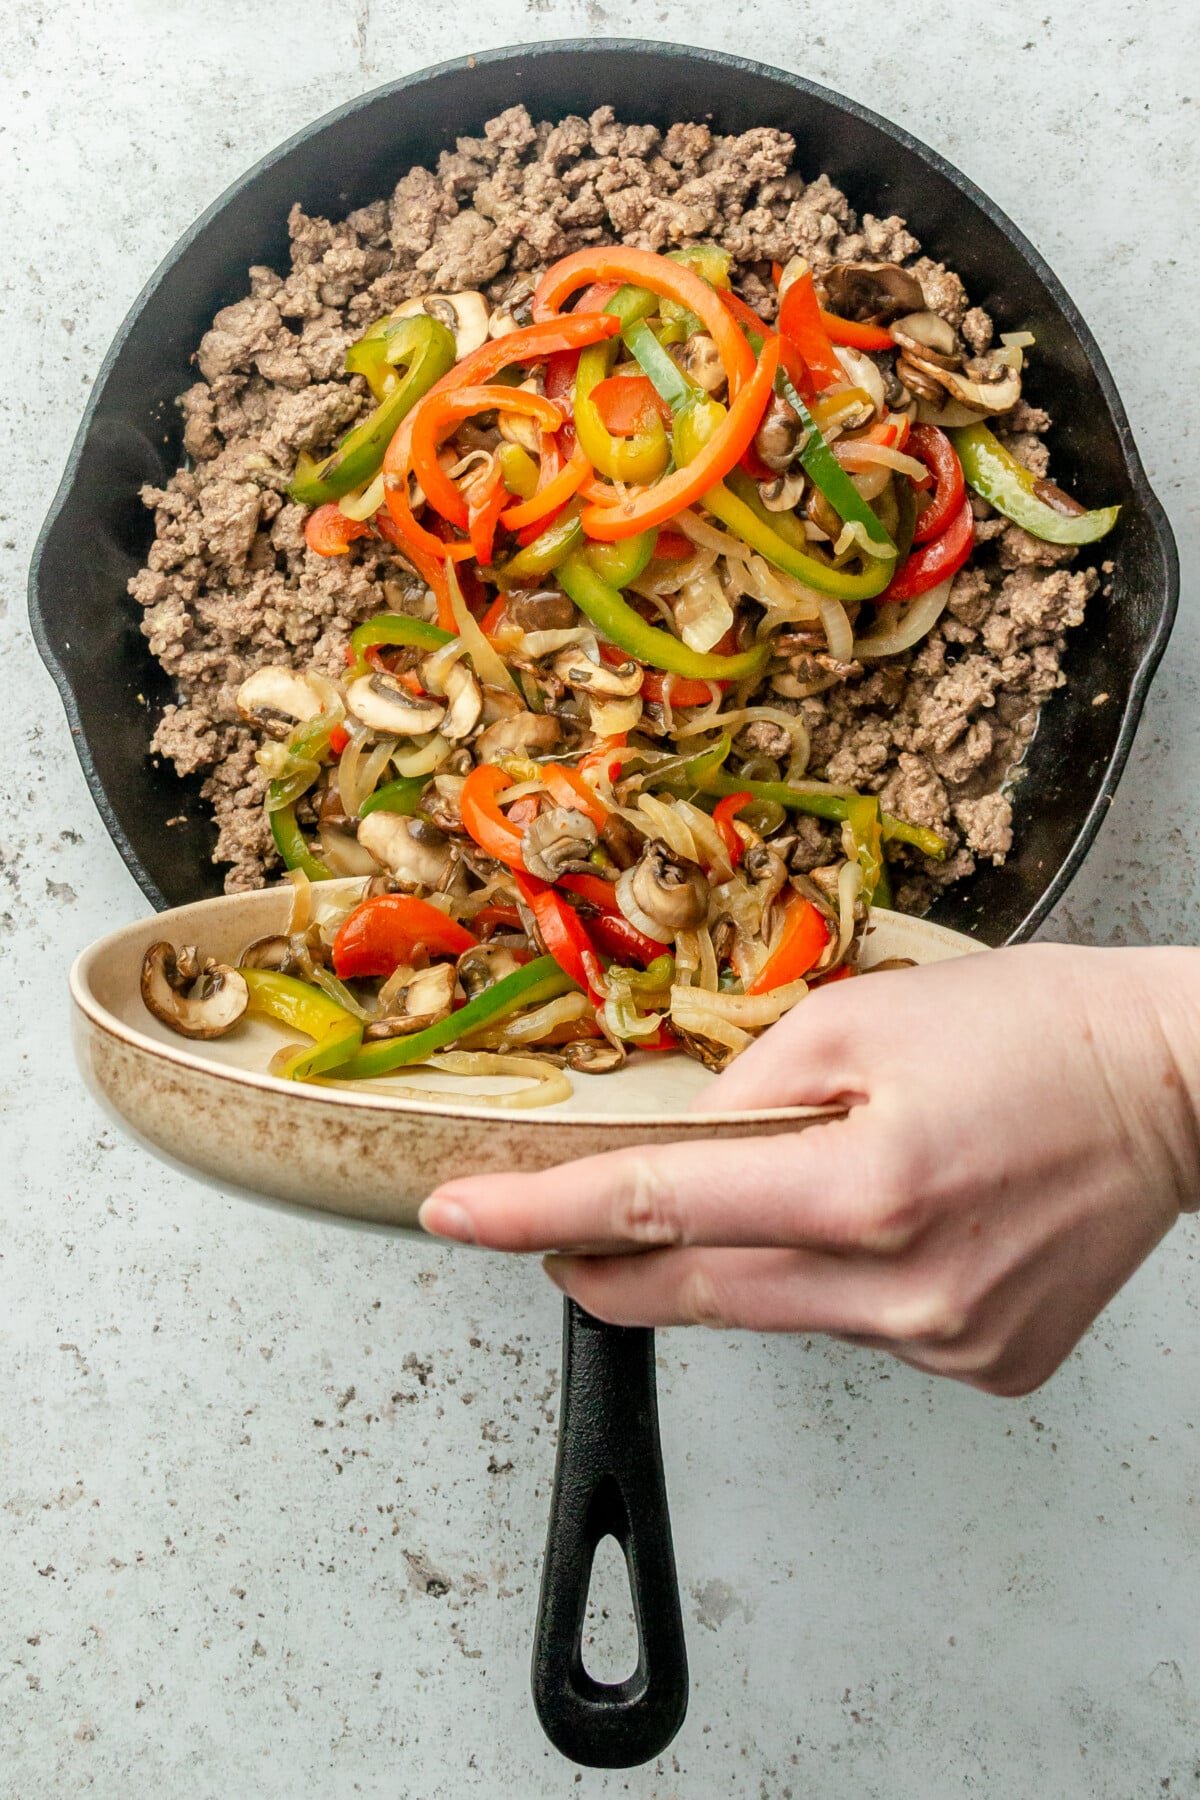 Cooked vegetables are tossed into browned minced beef in a cast iron skillet sitting on a light grey colored surface.